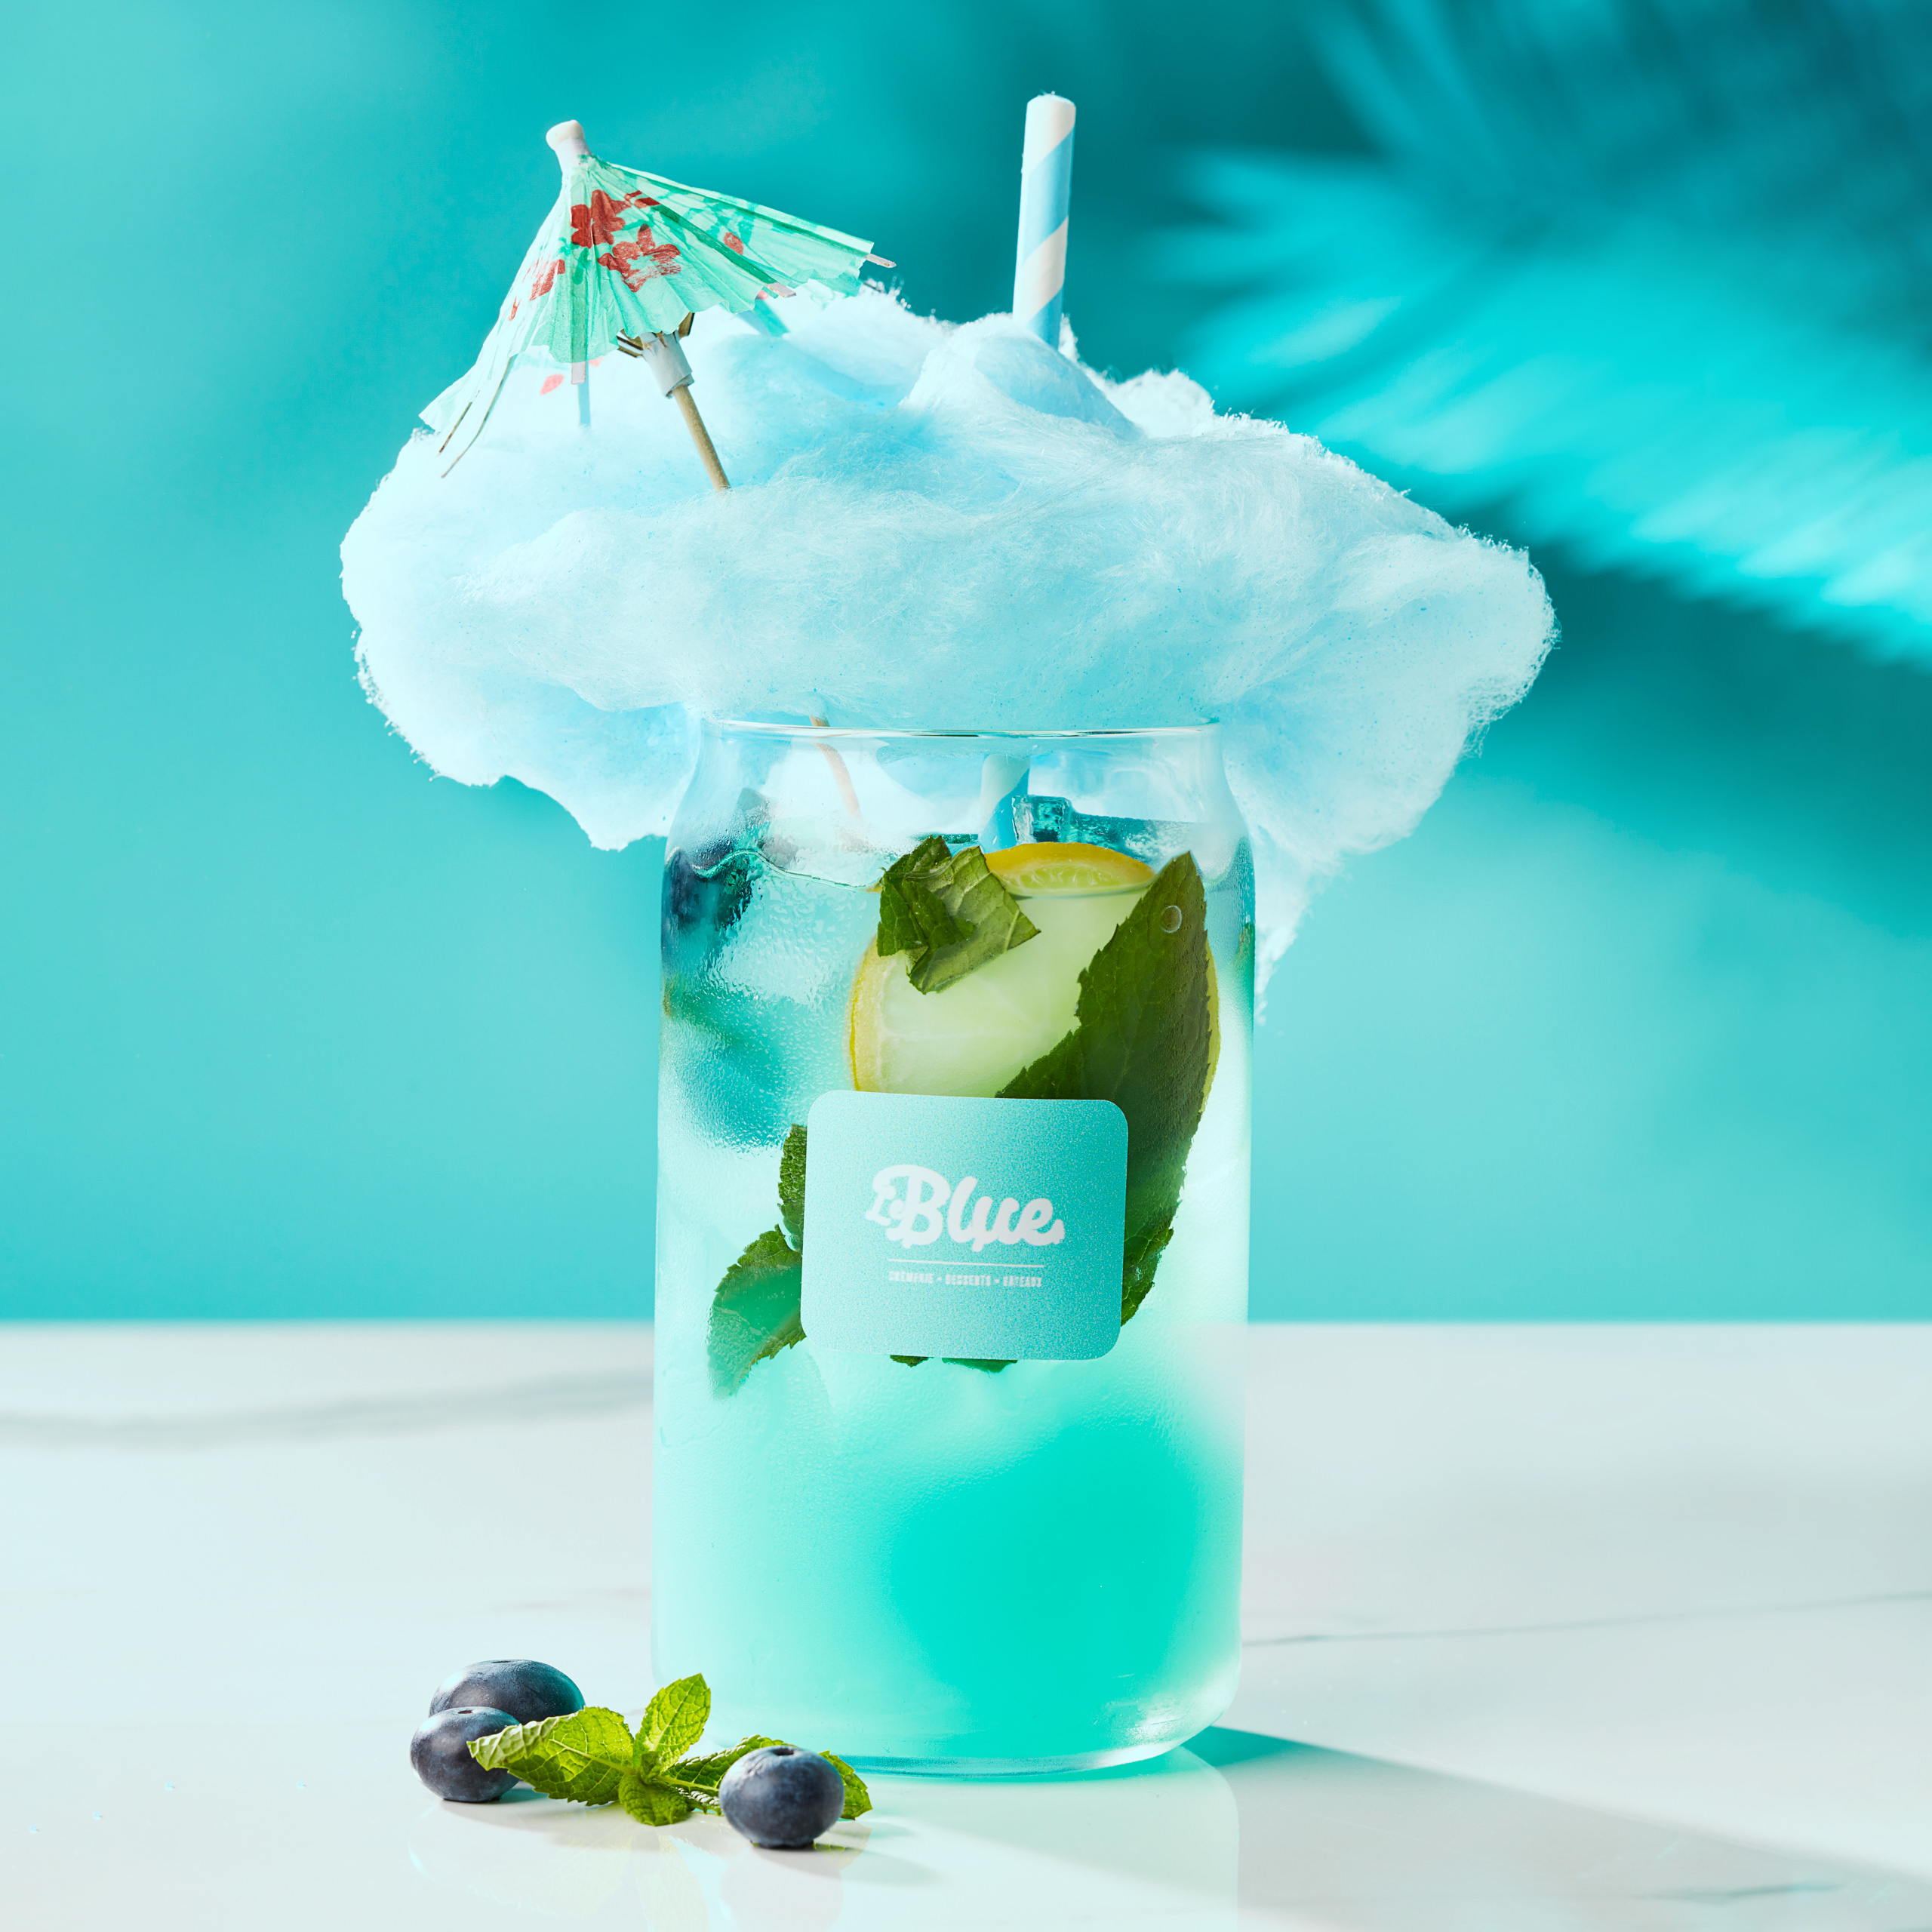 Le Blue Drink Image - Social Media Content Creator and Photographer